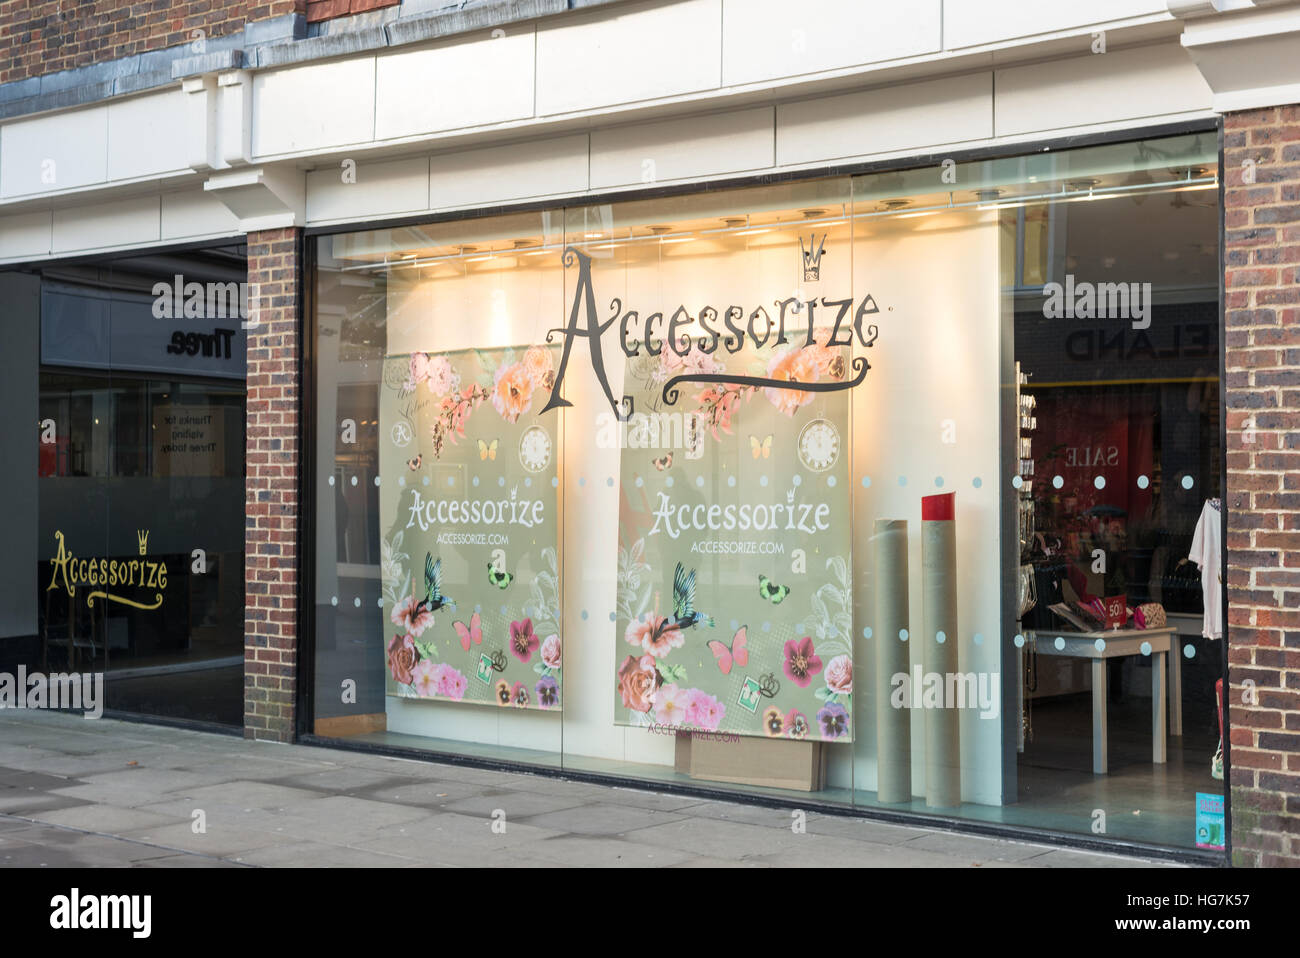 A shop window of Accessorize, a trimmings and garnish women's fashion accessory retailer in the UK. Stock Photo